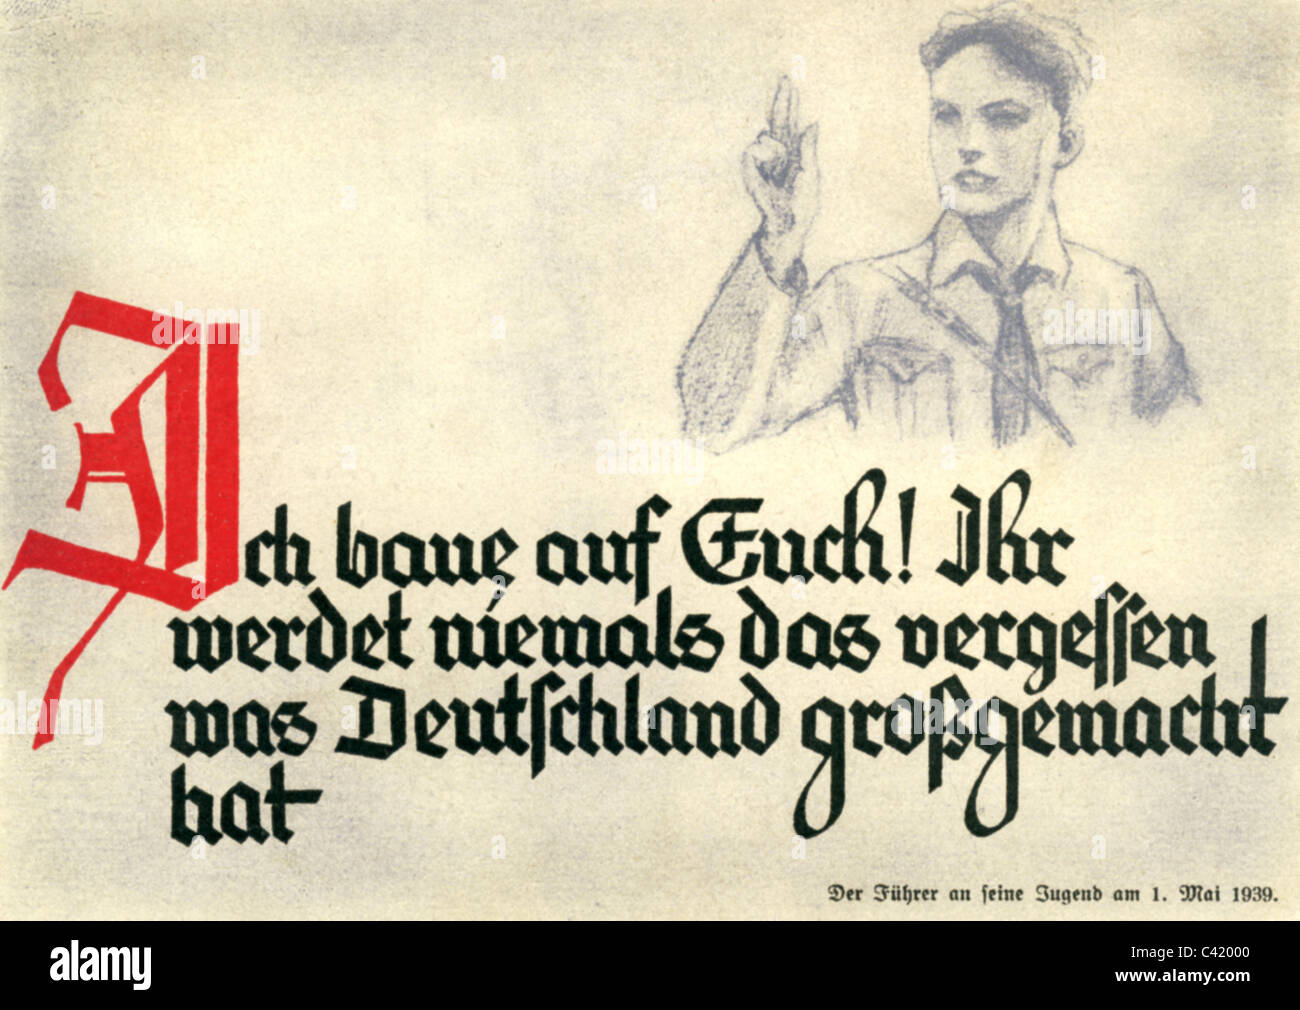 Nazism / National Socialism, propaganda, 'I depend on you! You will never forget what made Germany great.', Hitler quote from 1.5.1939, adressed to the German youth, postcard, 1939/1940, Additional-Rights-Clearences-Not Available Stock Photo